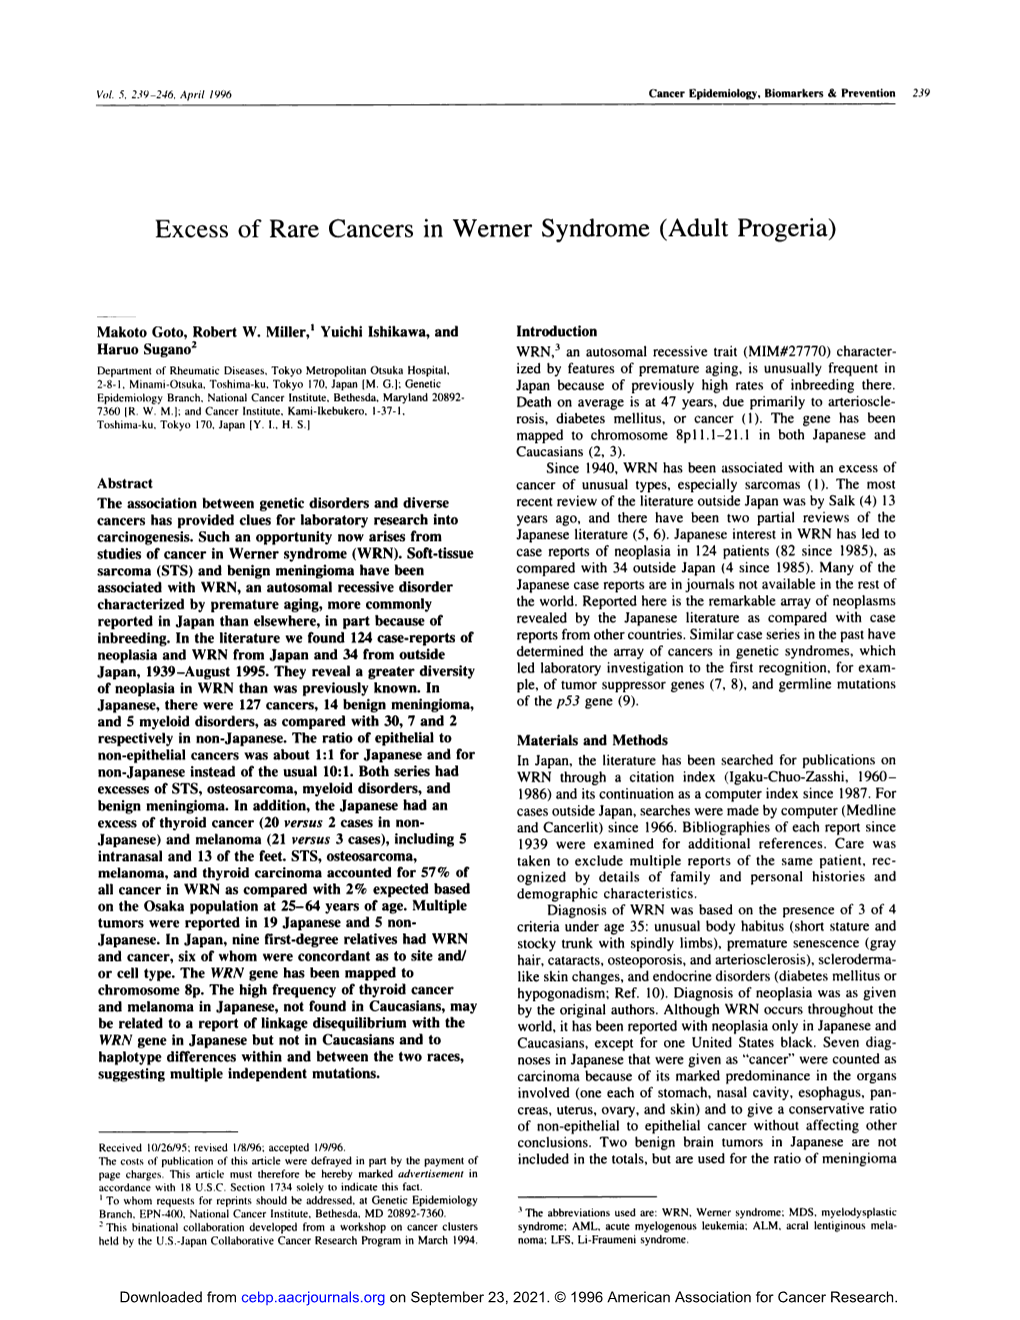 Excess of Rare Cancers in Werner Syndrome (Adult Progeria)